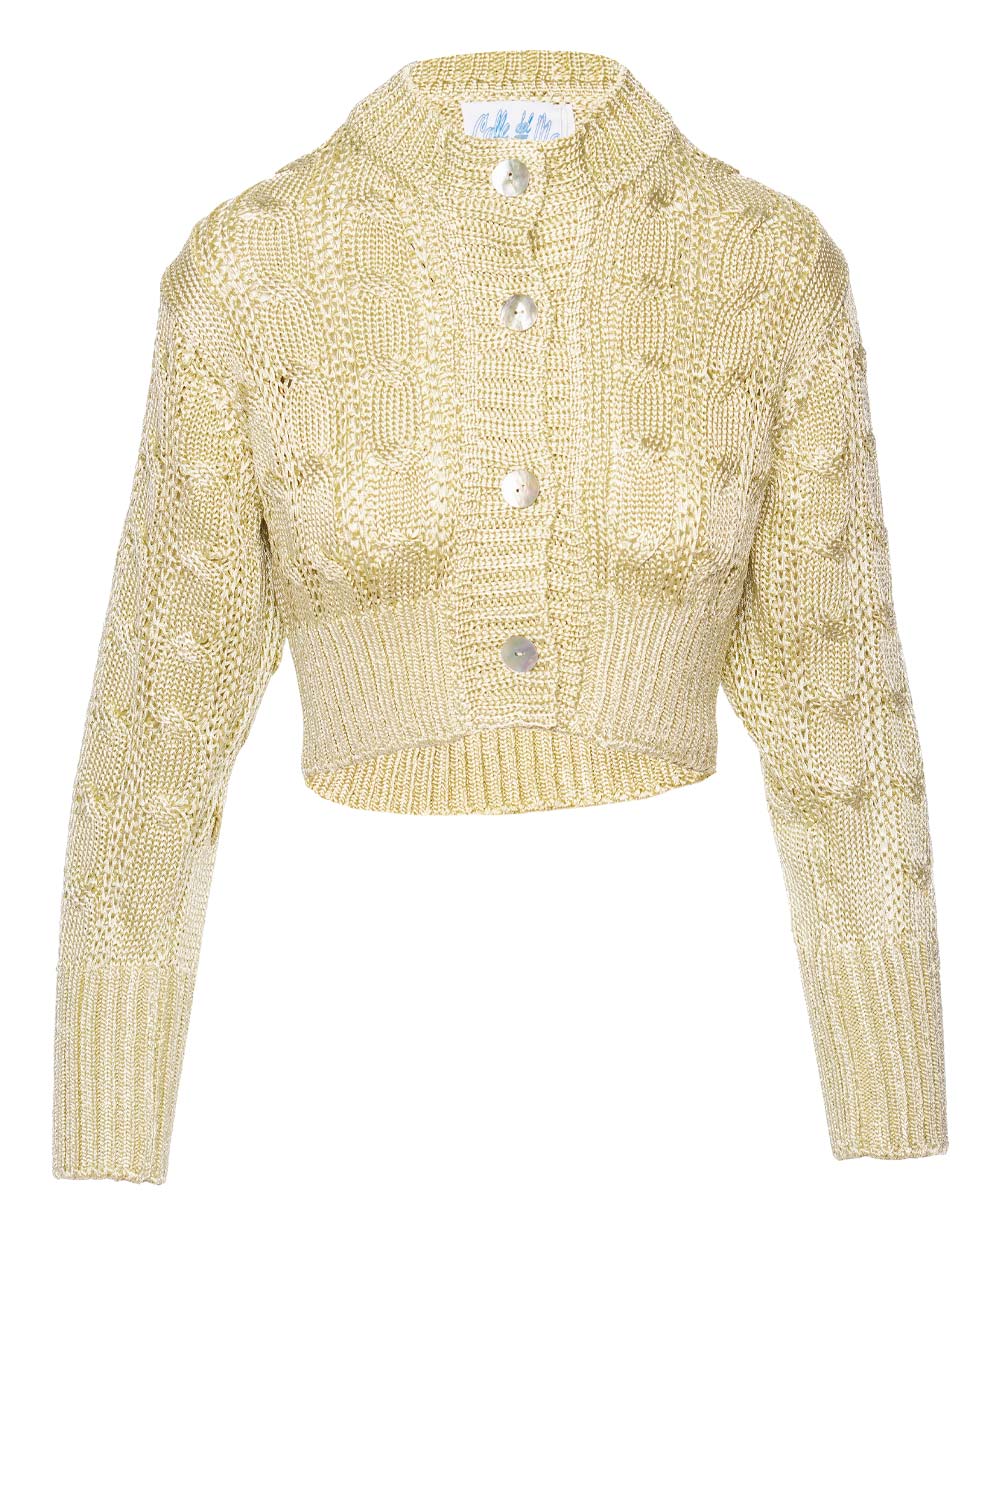 Calle Del Mar Jasmine Chunky Cable Knit Cardigan